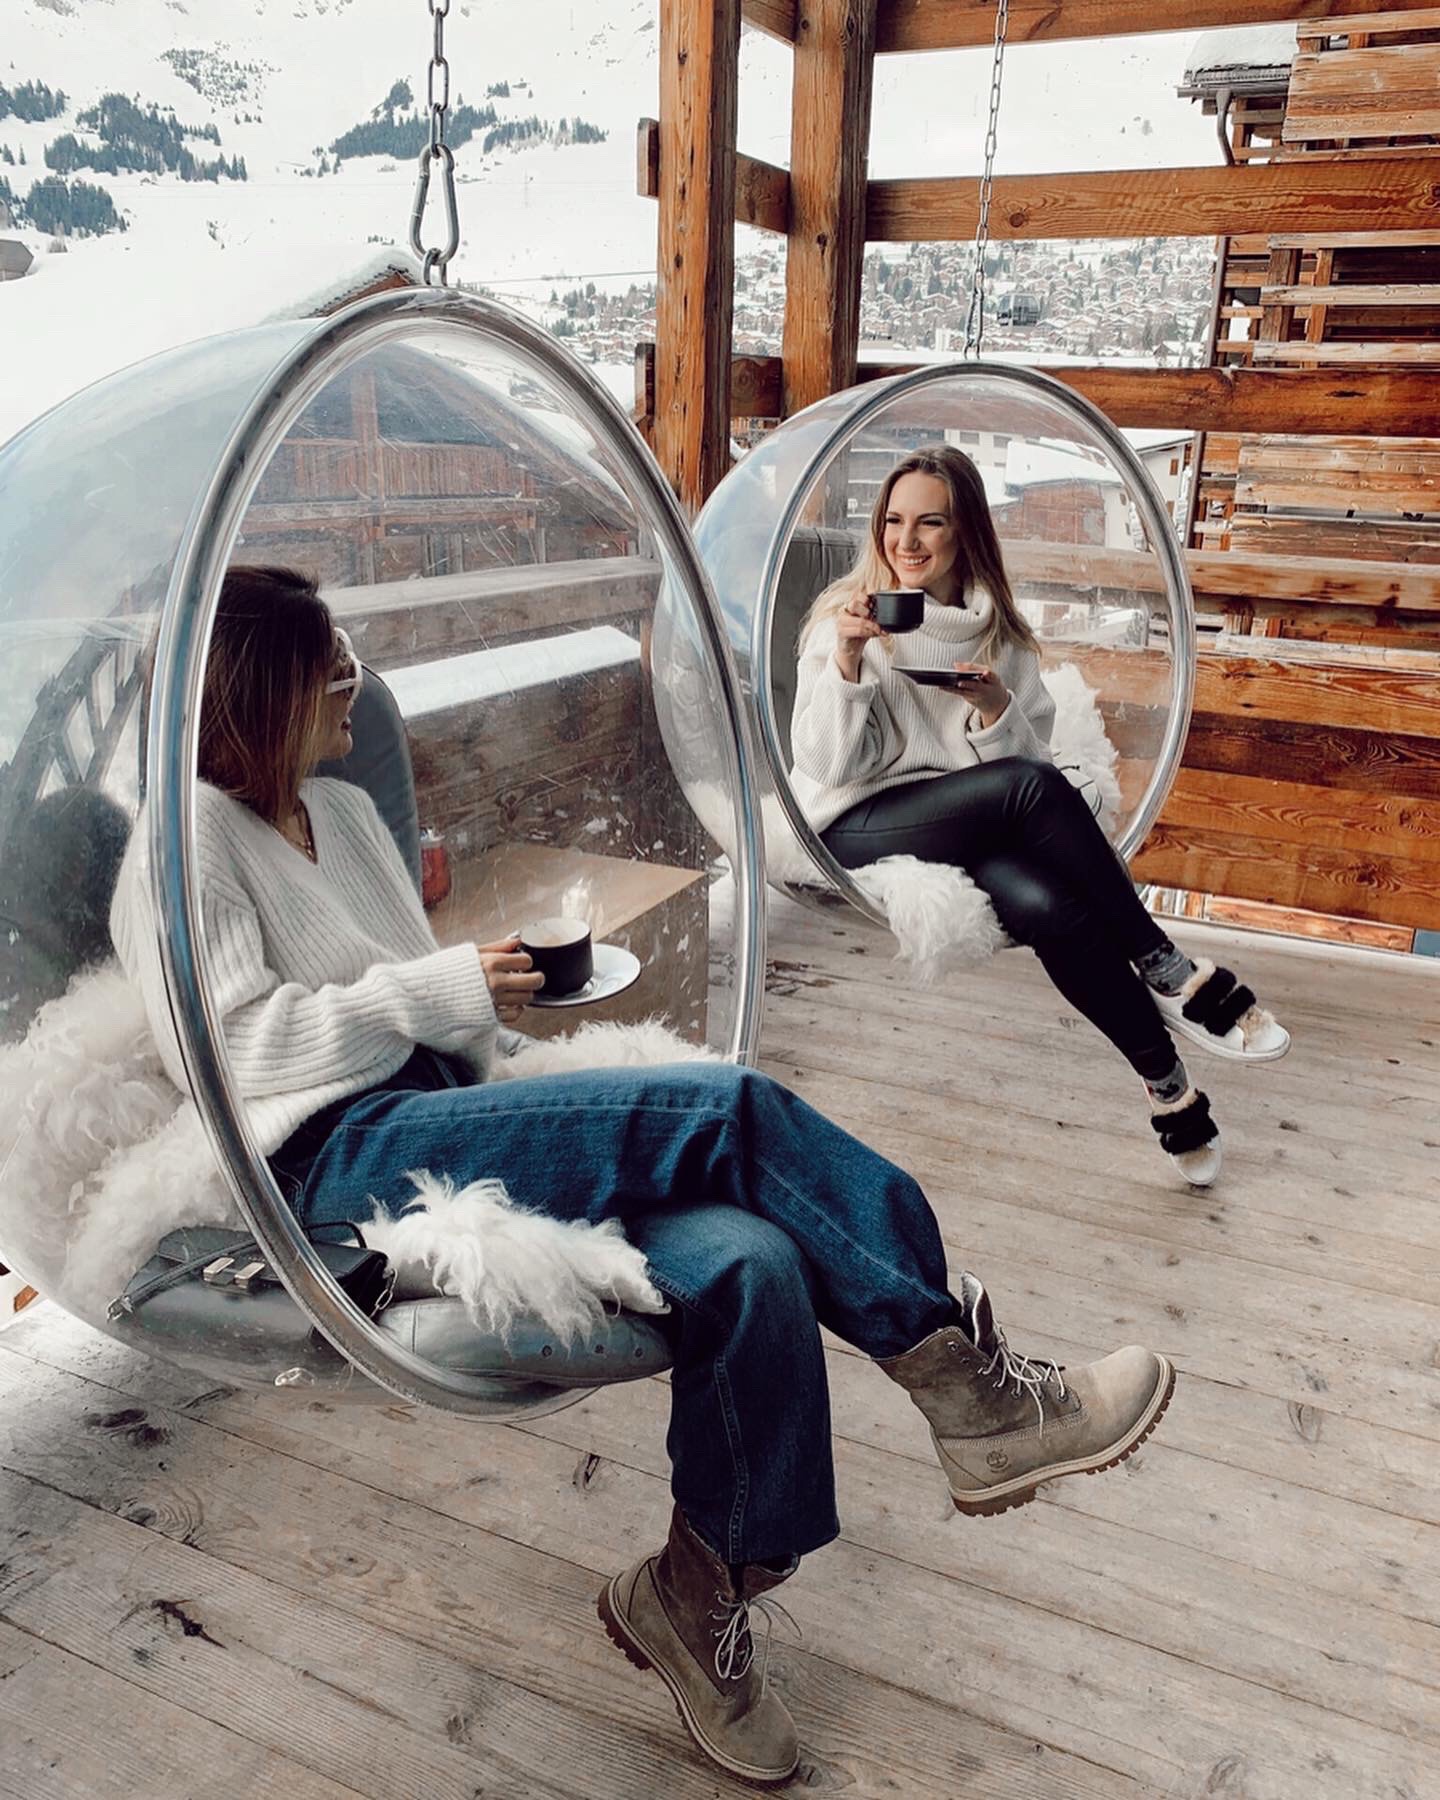 Swiss influencers at W hotel in Verbier